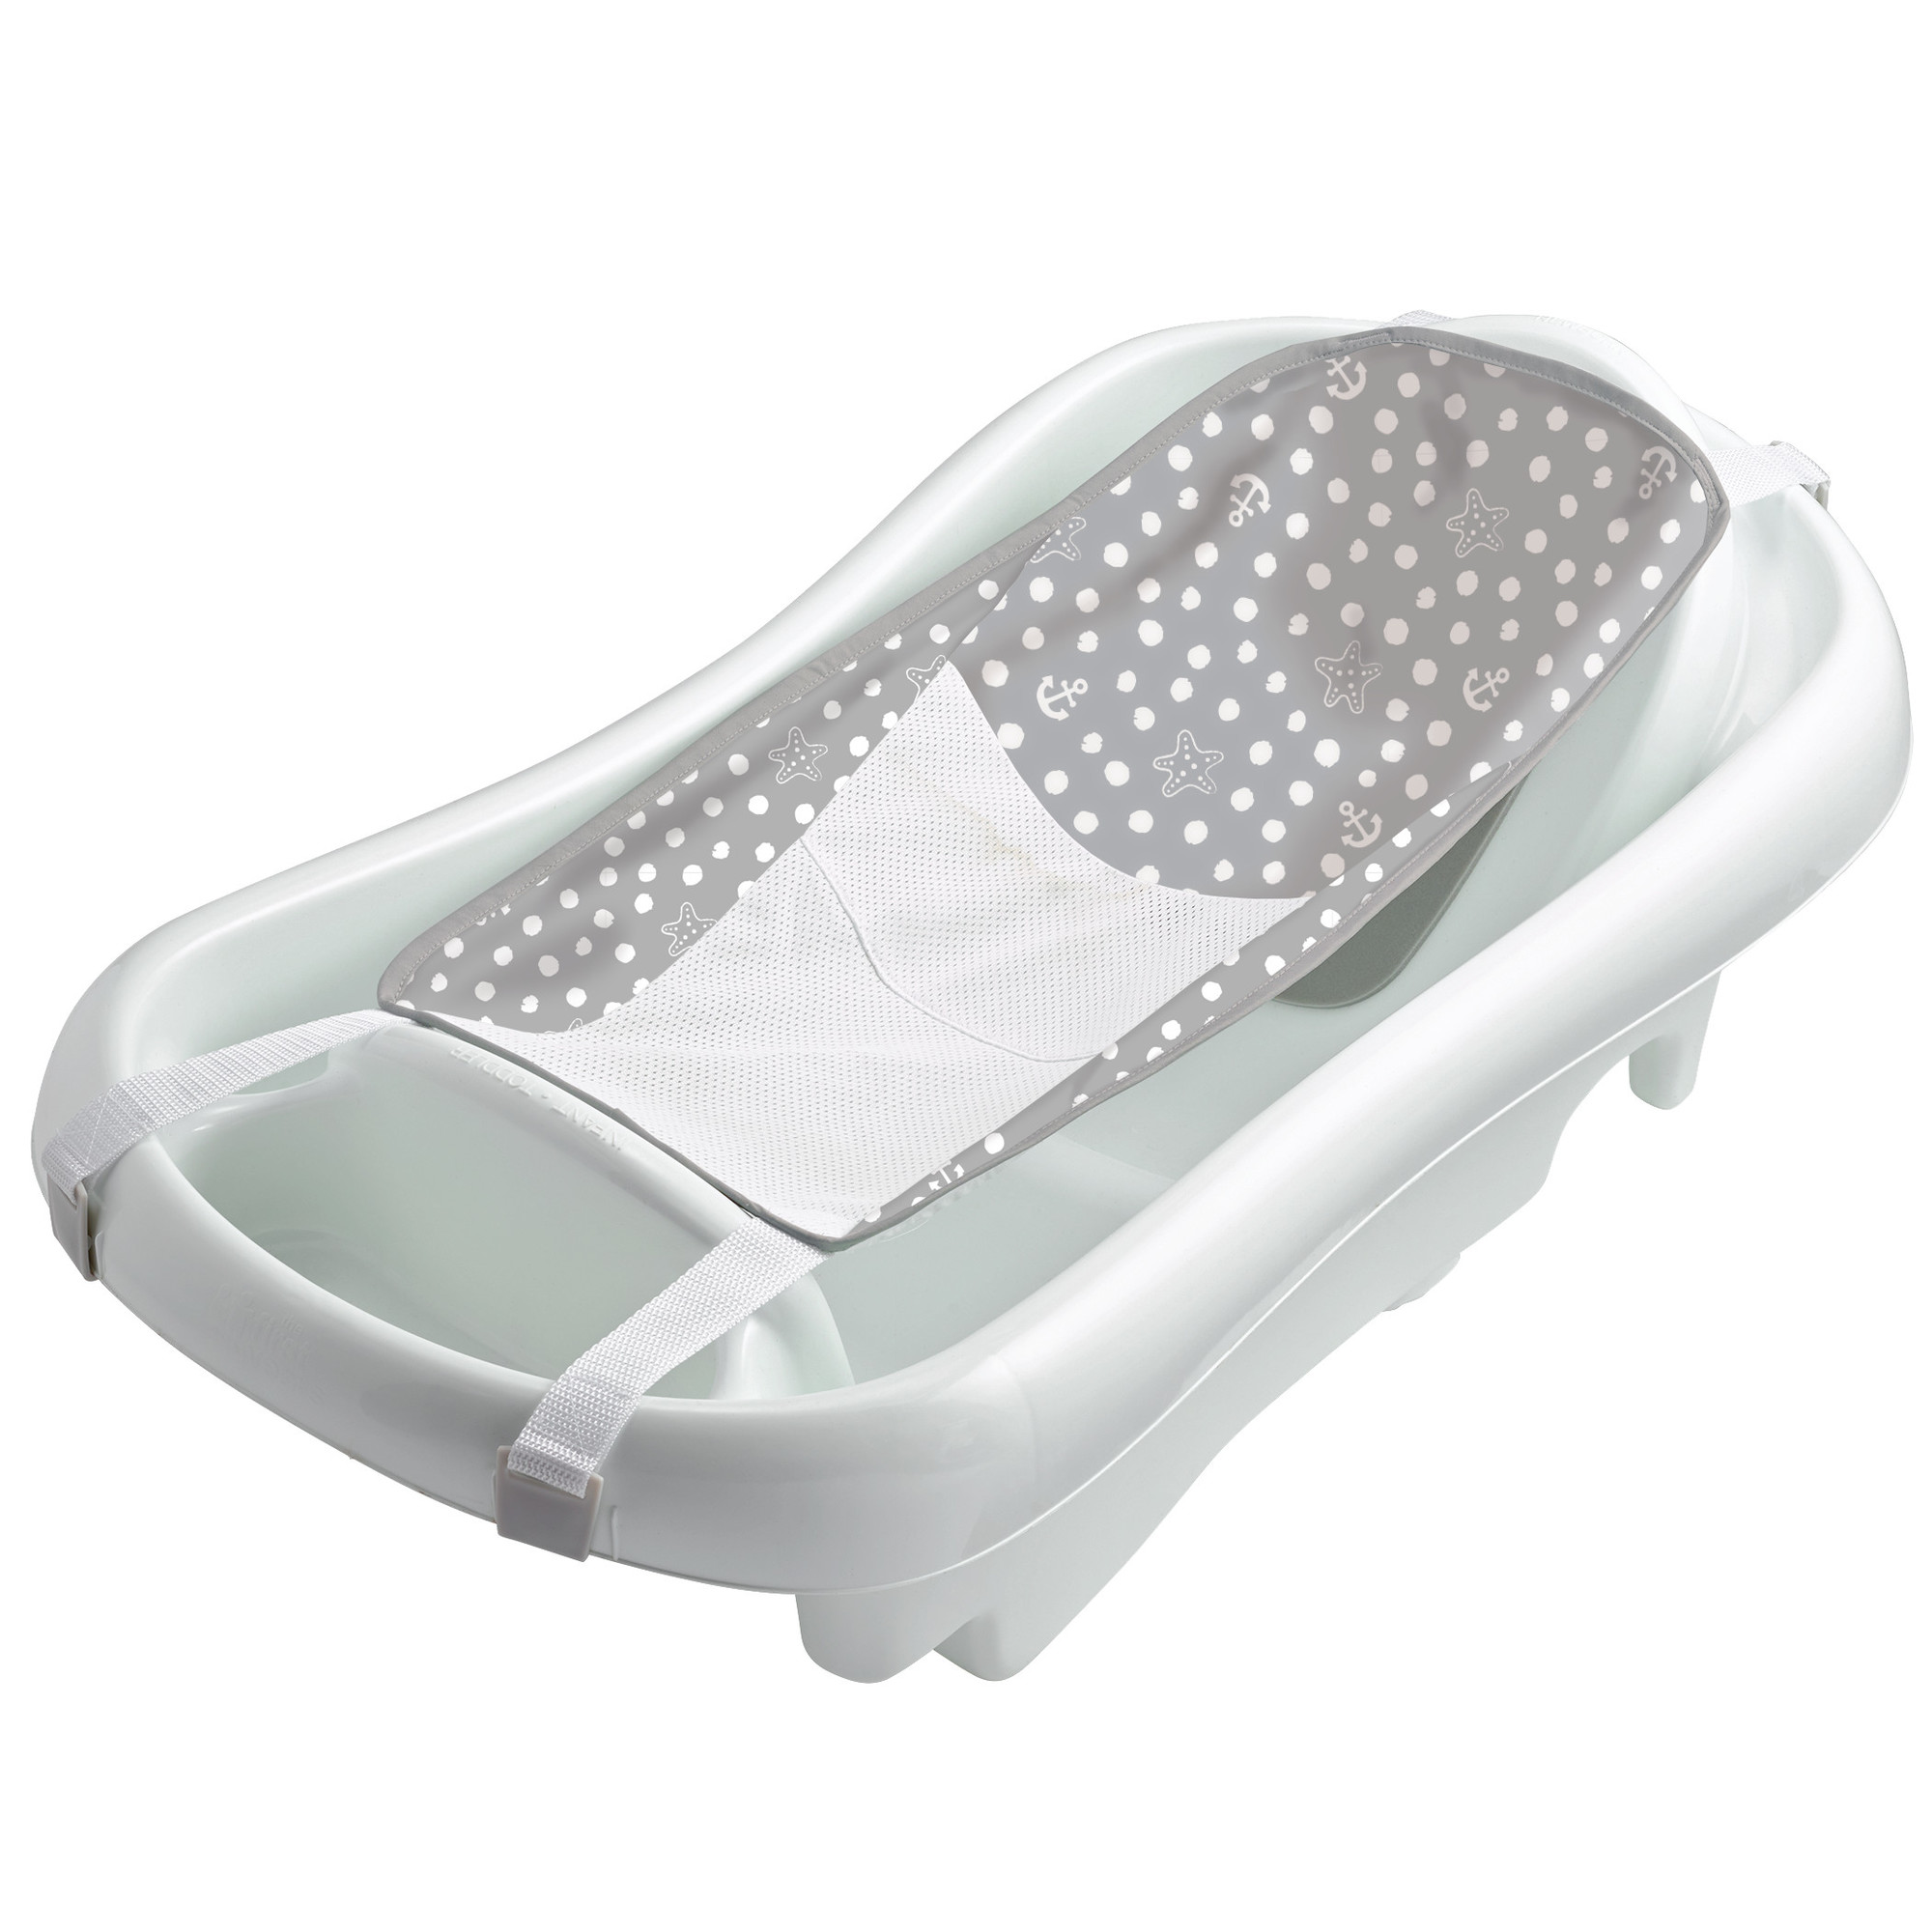 The First Years Sure Comfort Newborn to Toddler Tub, White - image 1 of 4